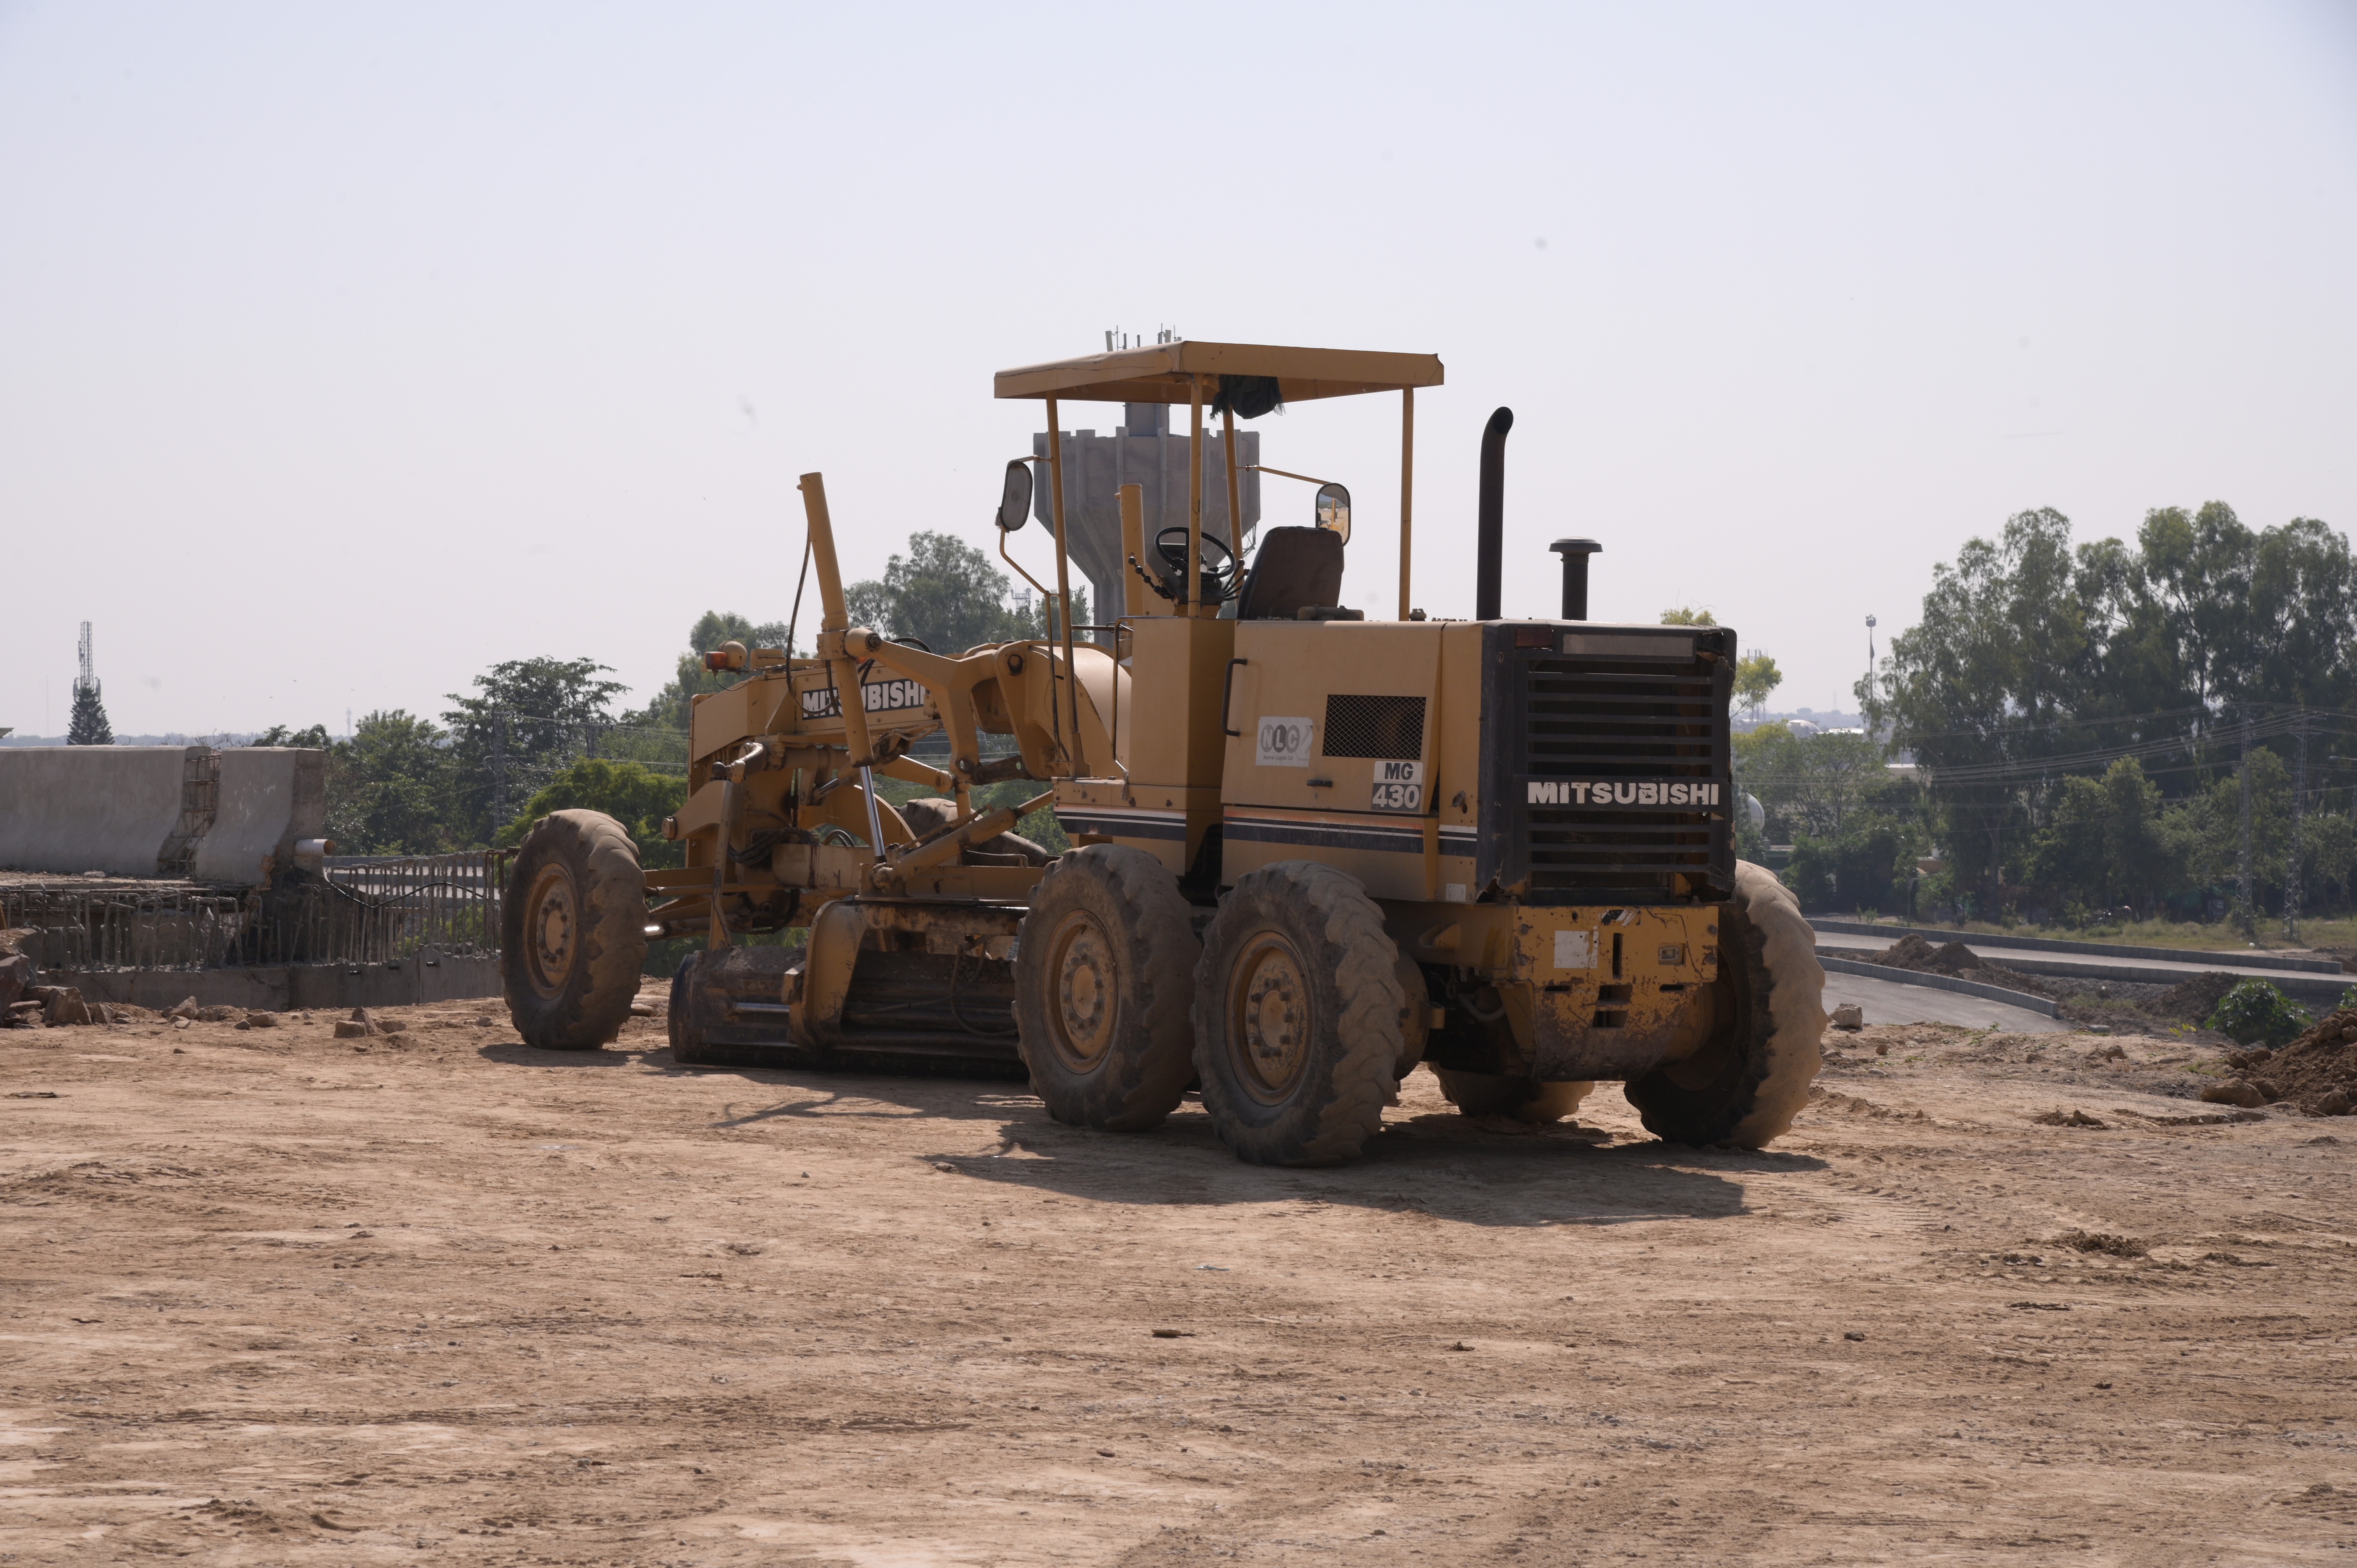 Heavy machinery deployed by the National Logistic Cell (NLC) at the construction site in the remote areas of Federal Capital of Pakistan